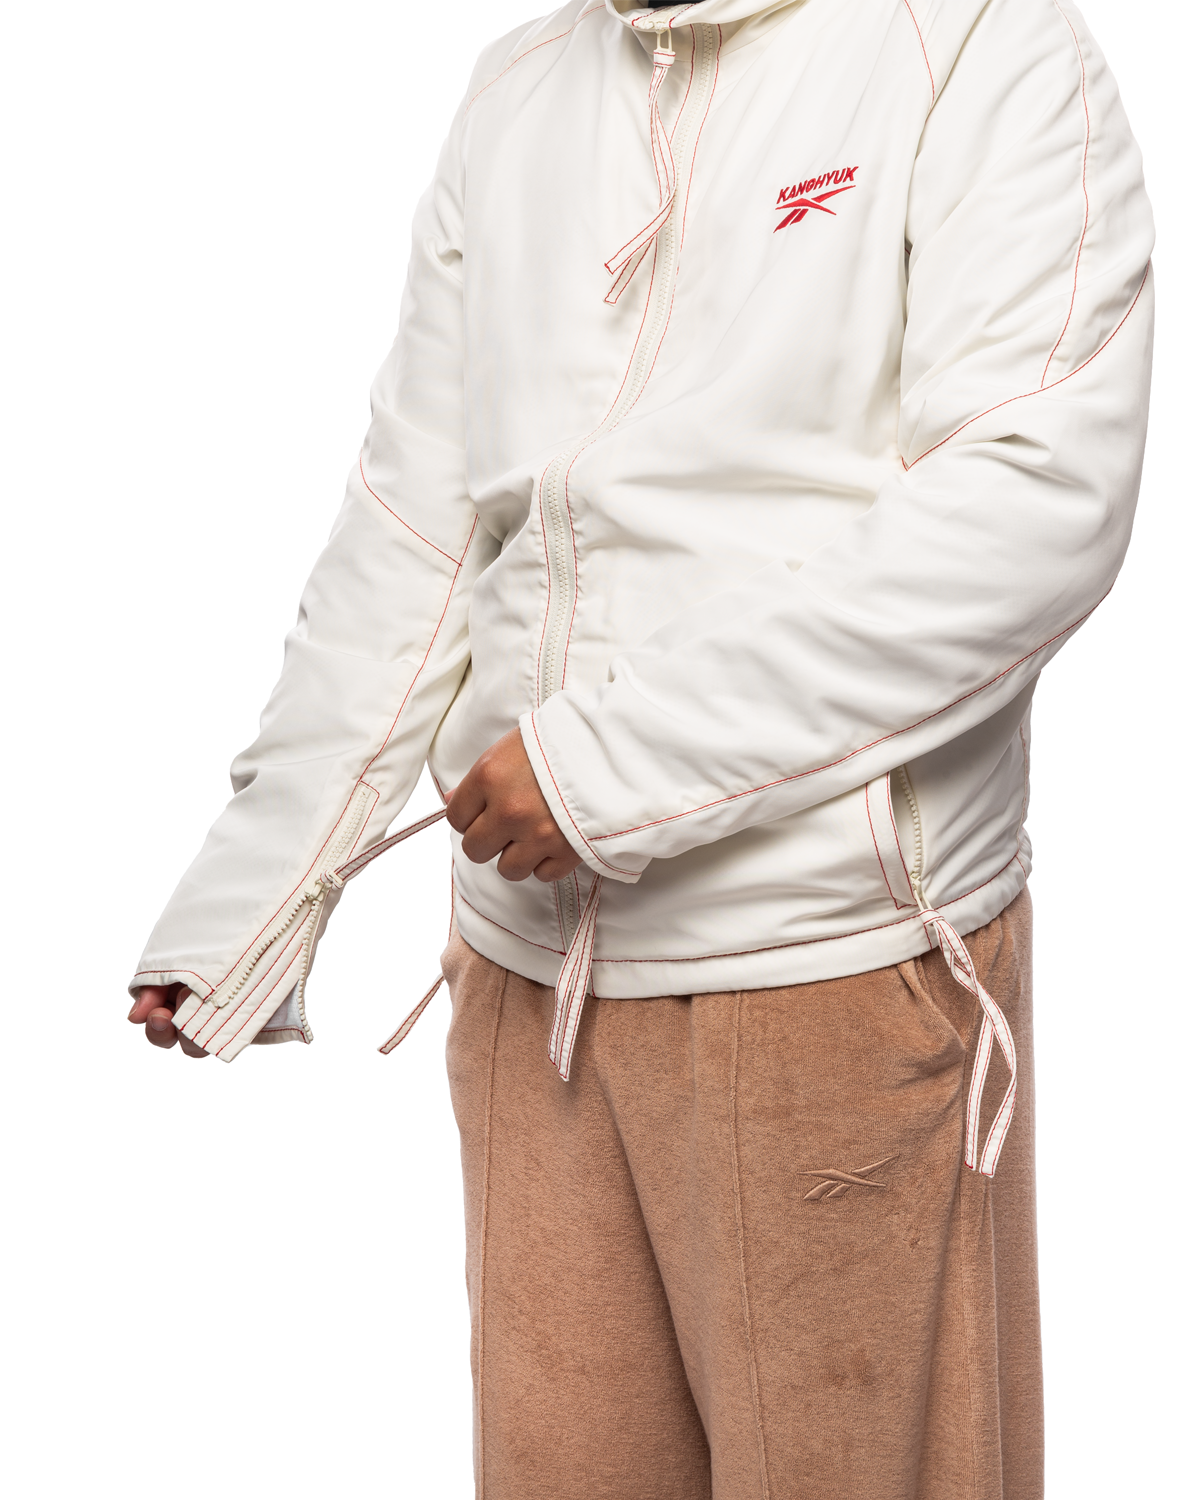 Track Jacket White/Red